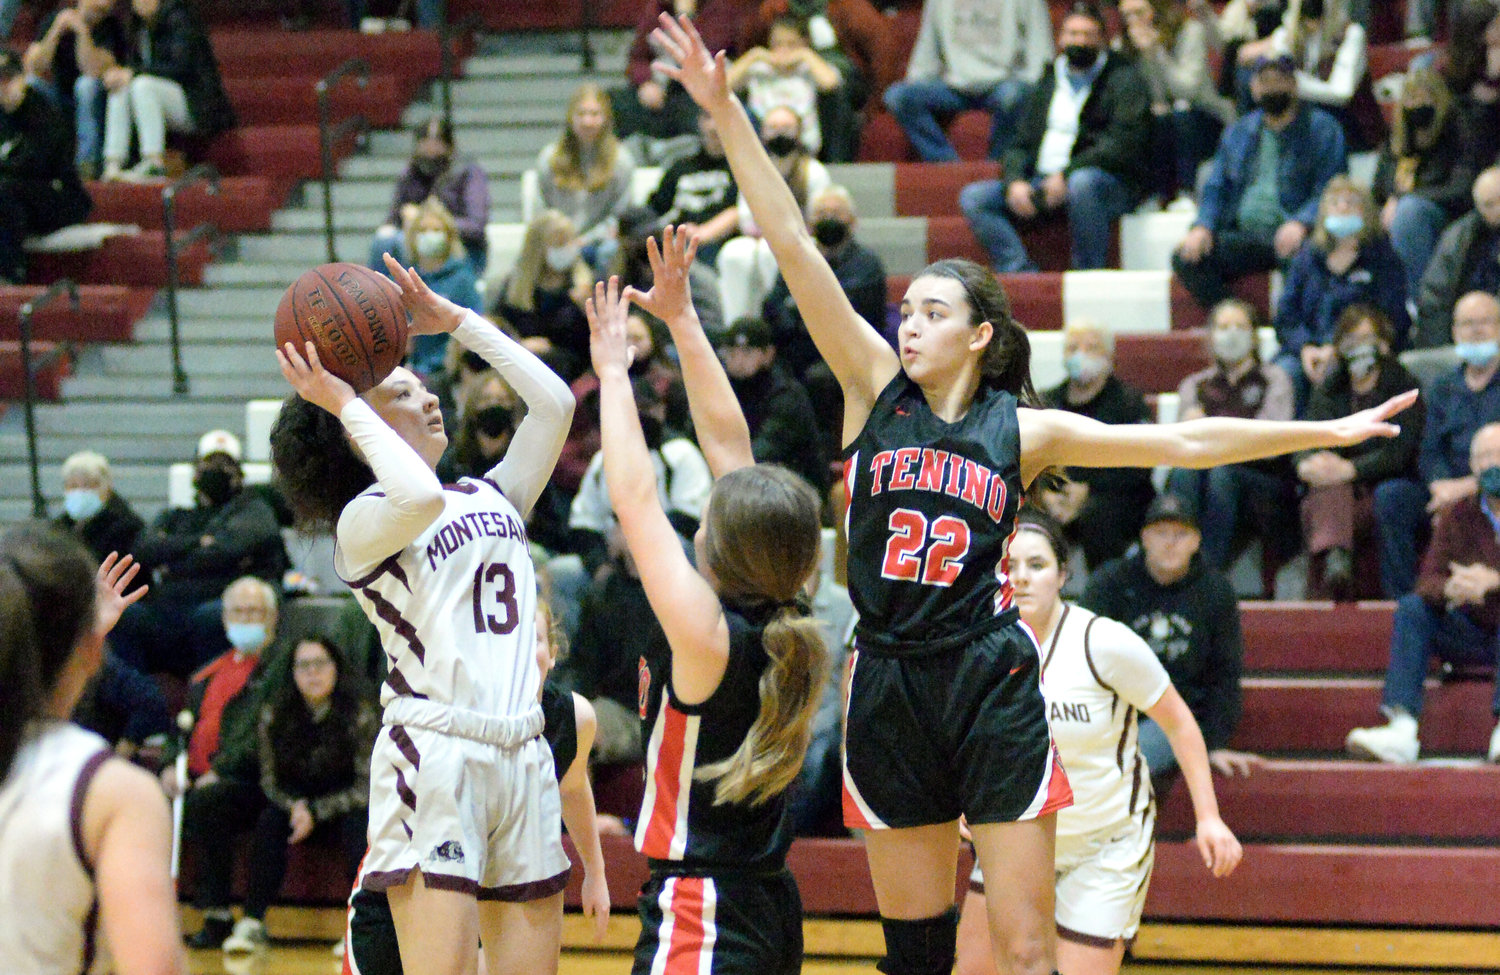 Tenino's Ashley Schow (22) defends against a Montesano player during a road game on Feb. 4.